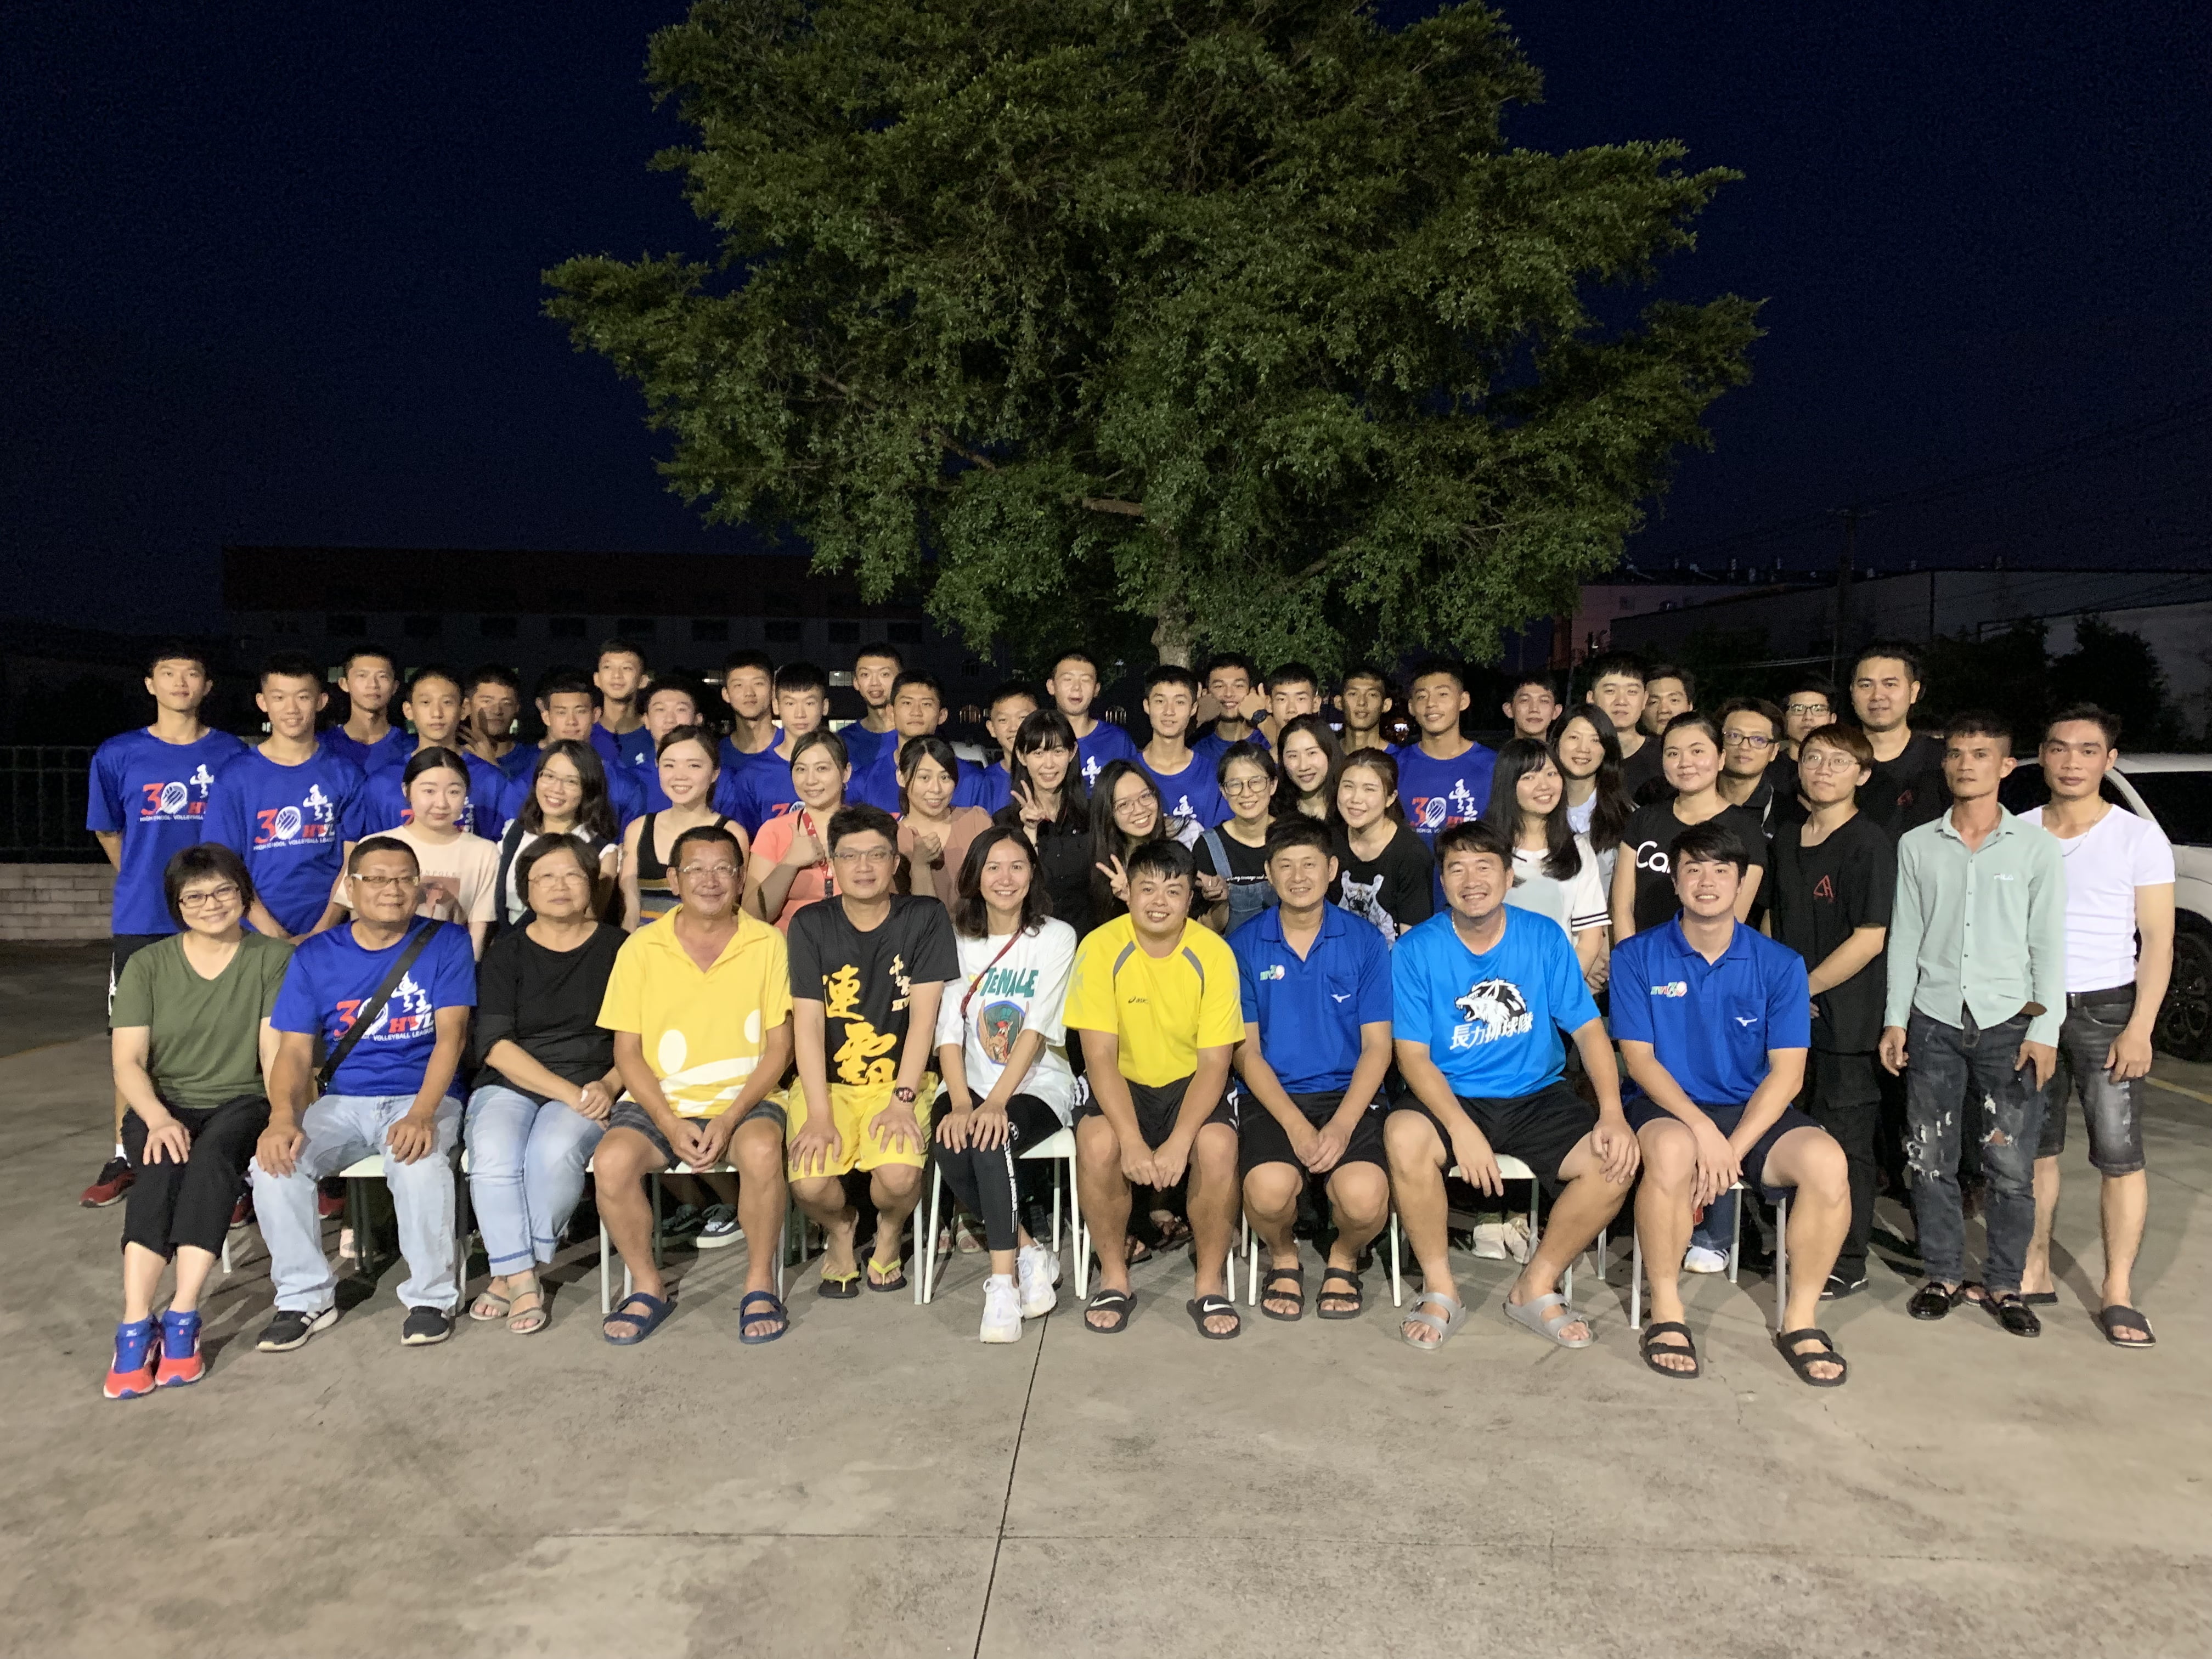 Lichen company and “Fengshang” Volleyball Club of orientation camp of night    